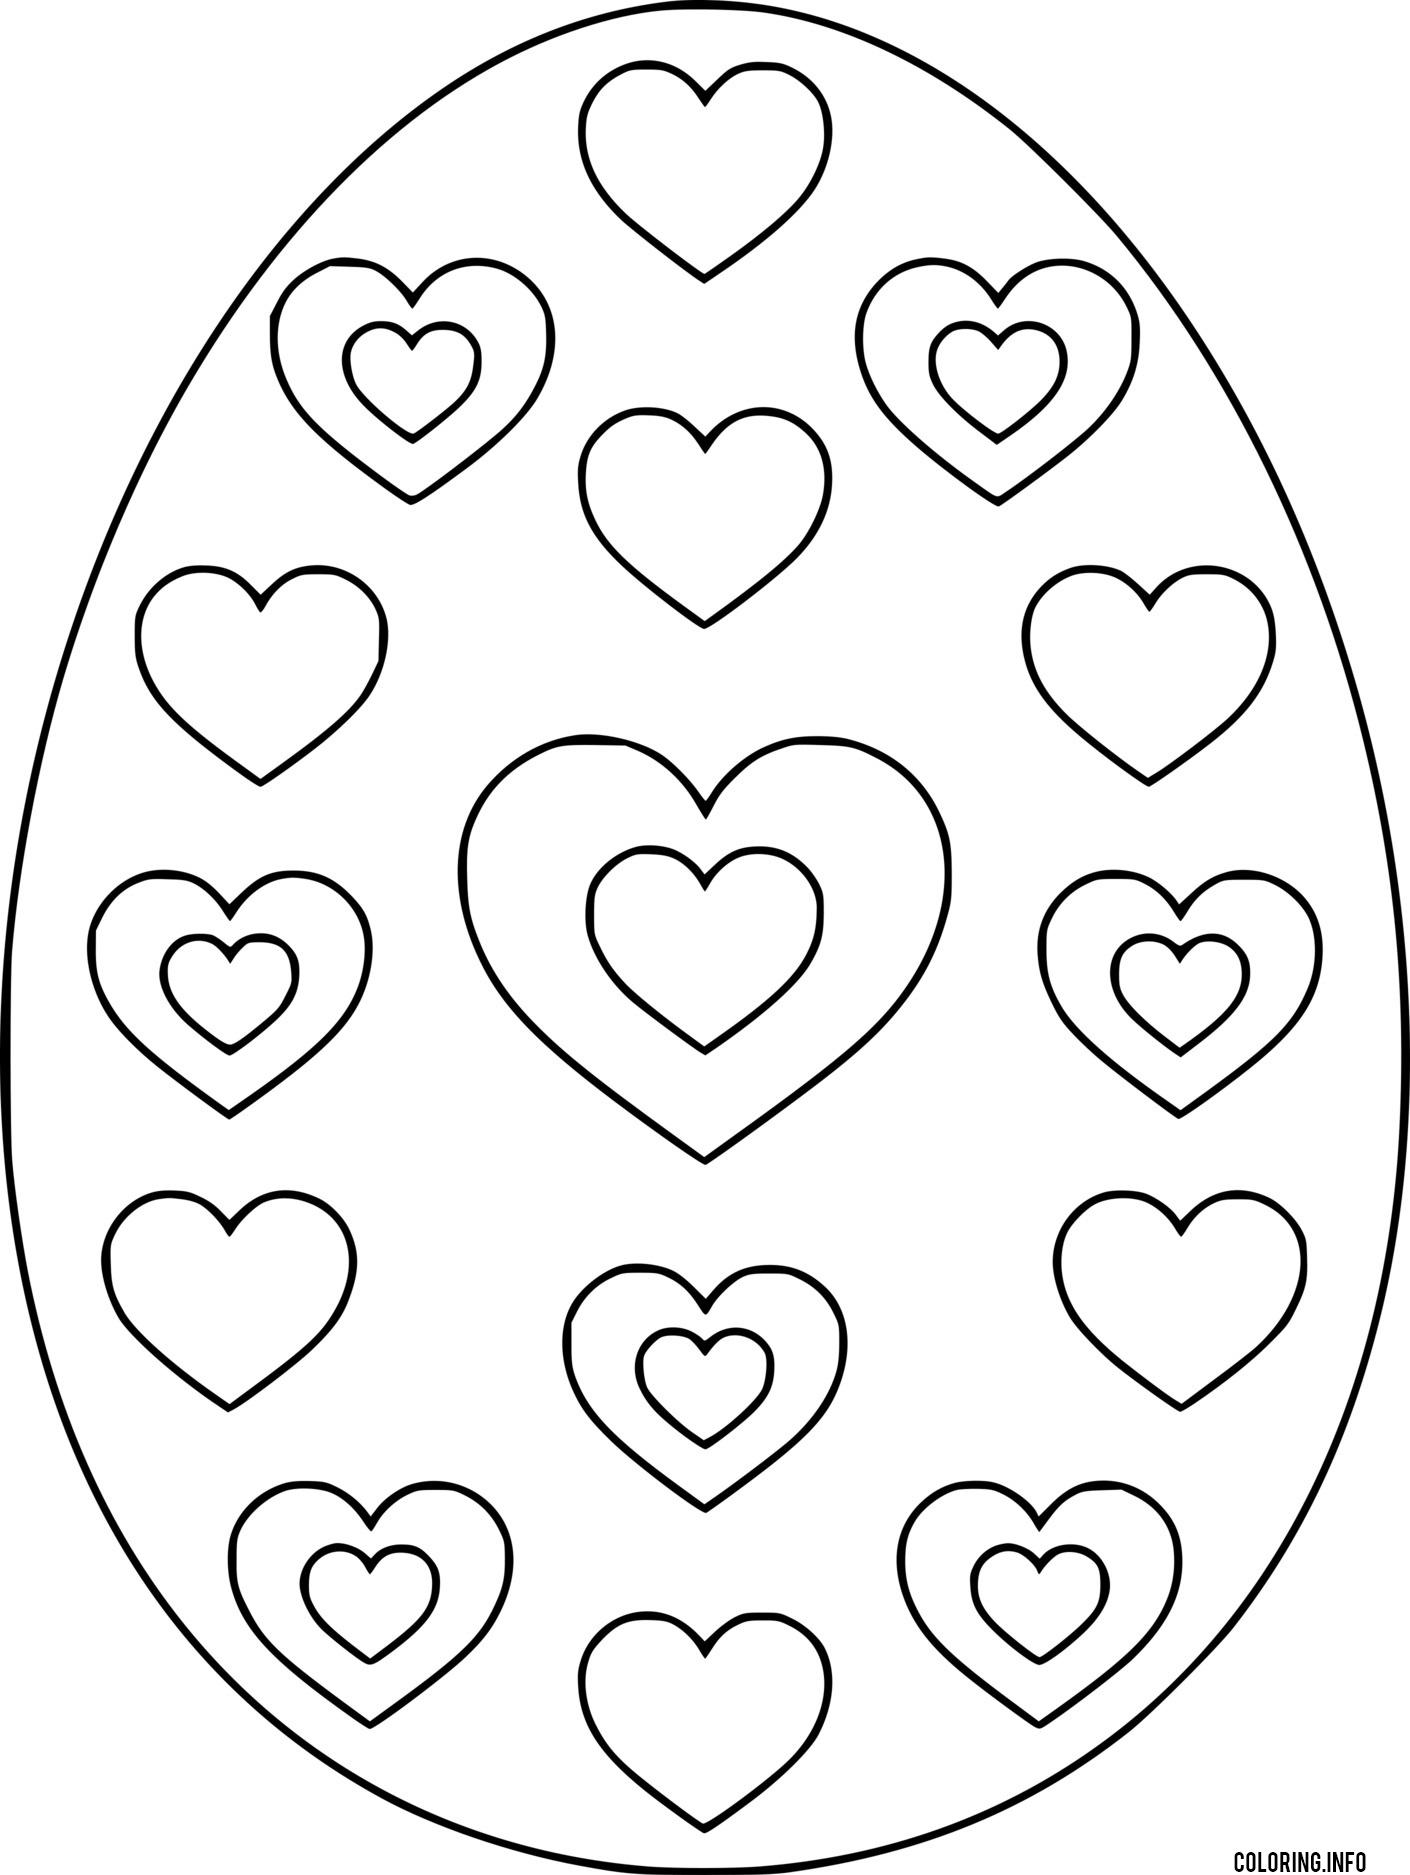 Easter Egg With Hearts Patterns coloring